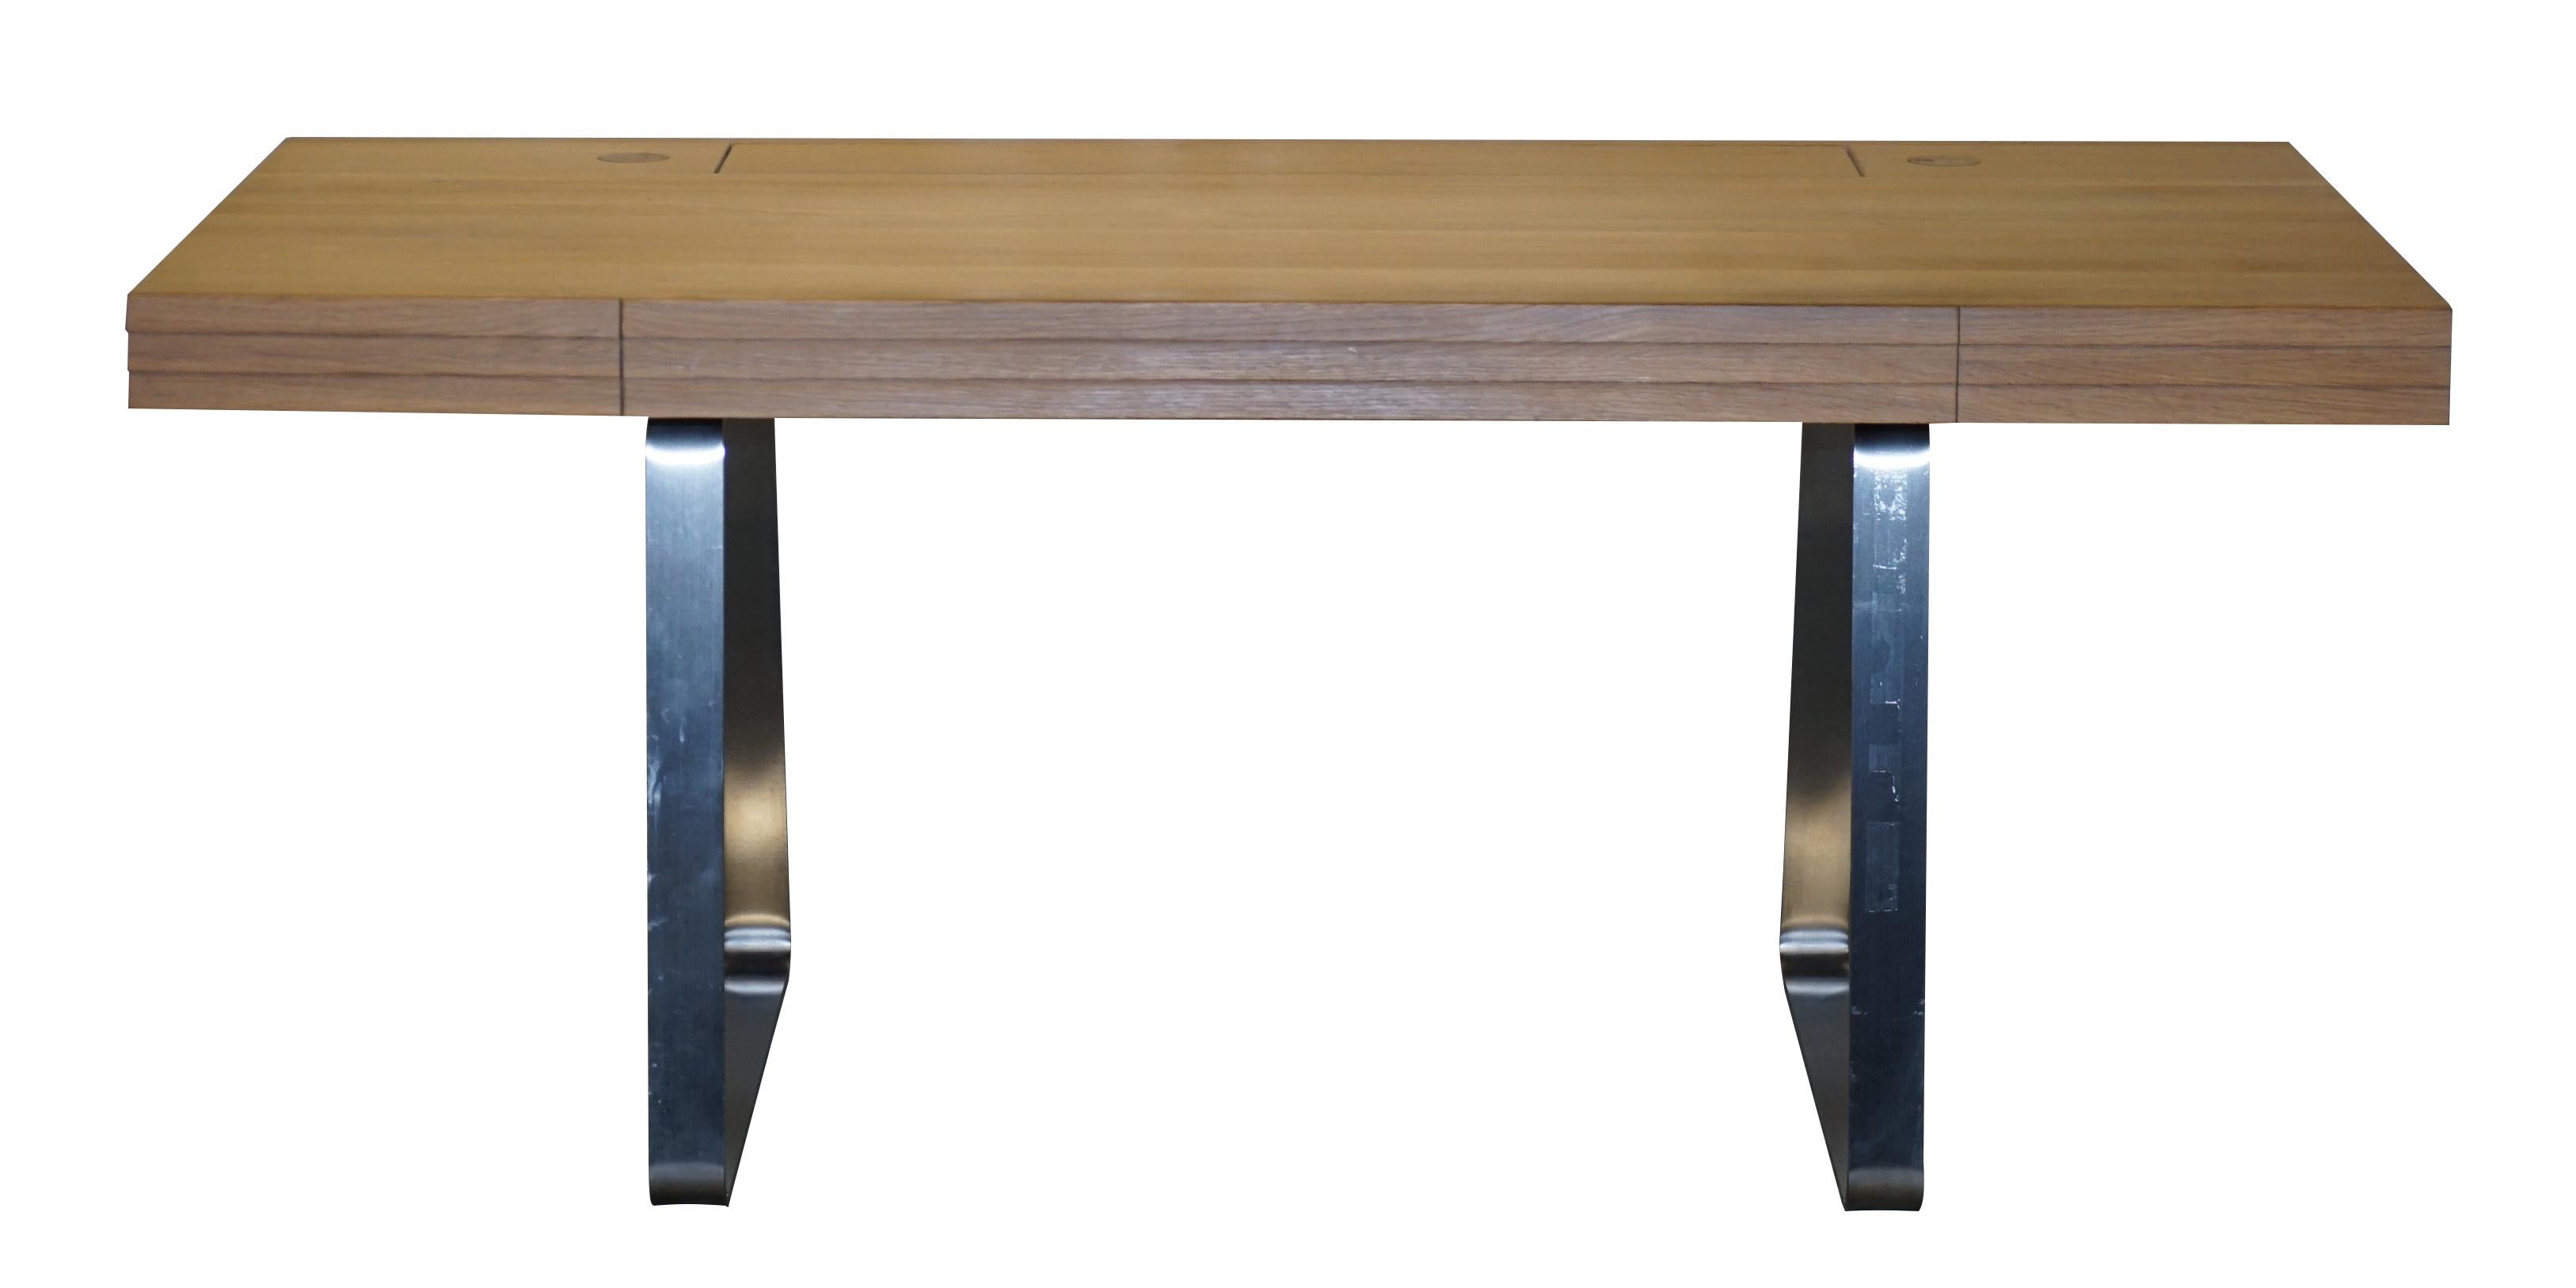 We are delighted to offer for sale this Ebby Gehl office desk retailed through John Lewis in solid oak with chrome base

Made from solid oak, this stunning desk has a smooth and sleek finish. The desk features metallic legs, and opens up to reveal